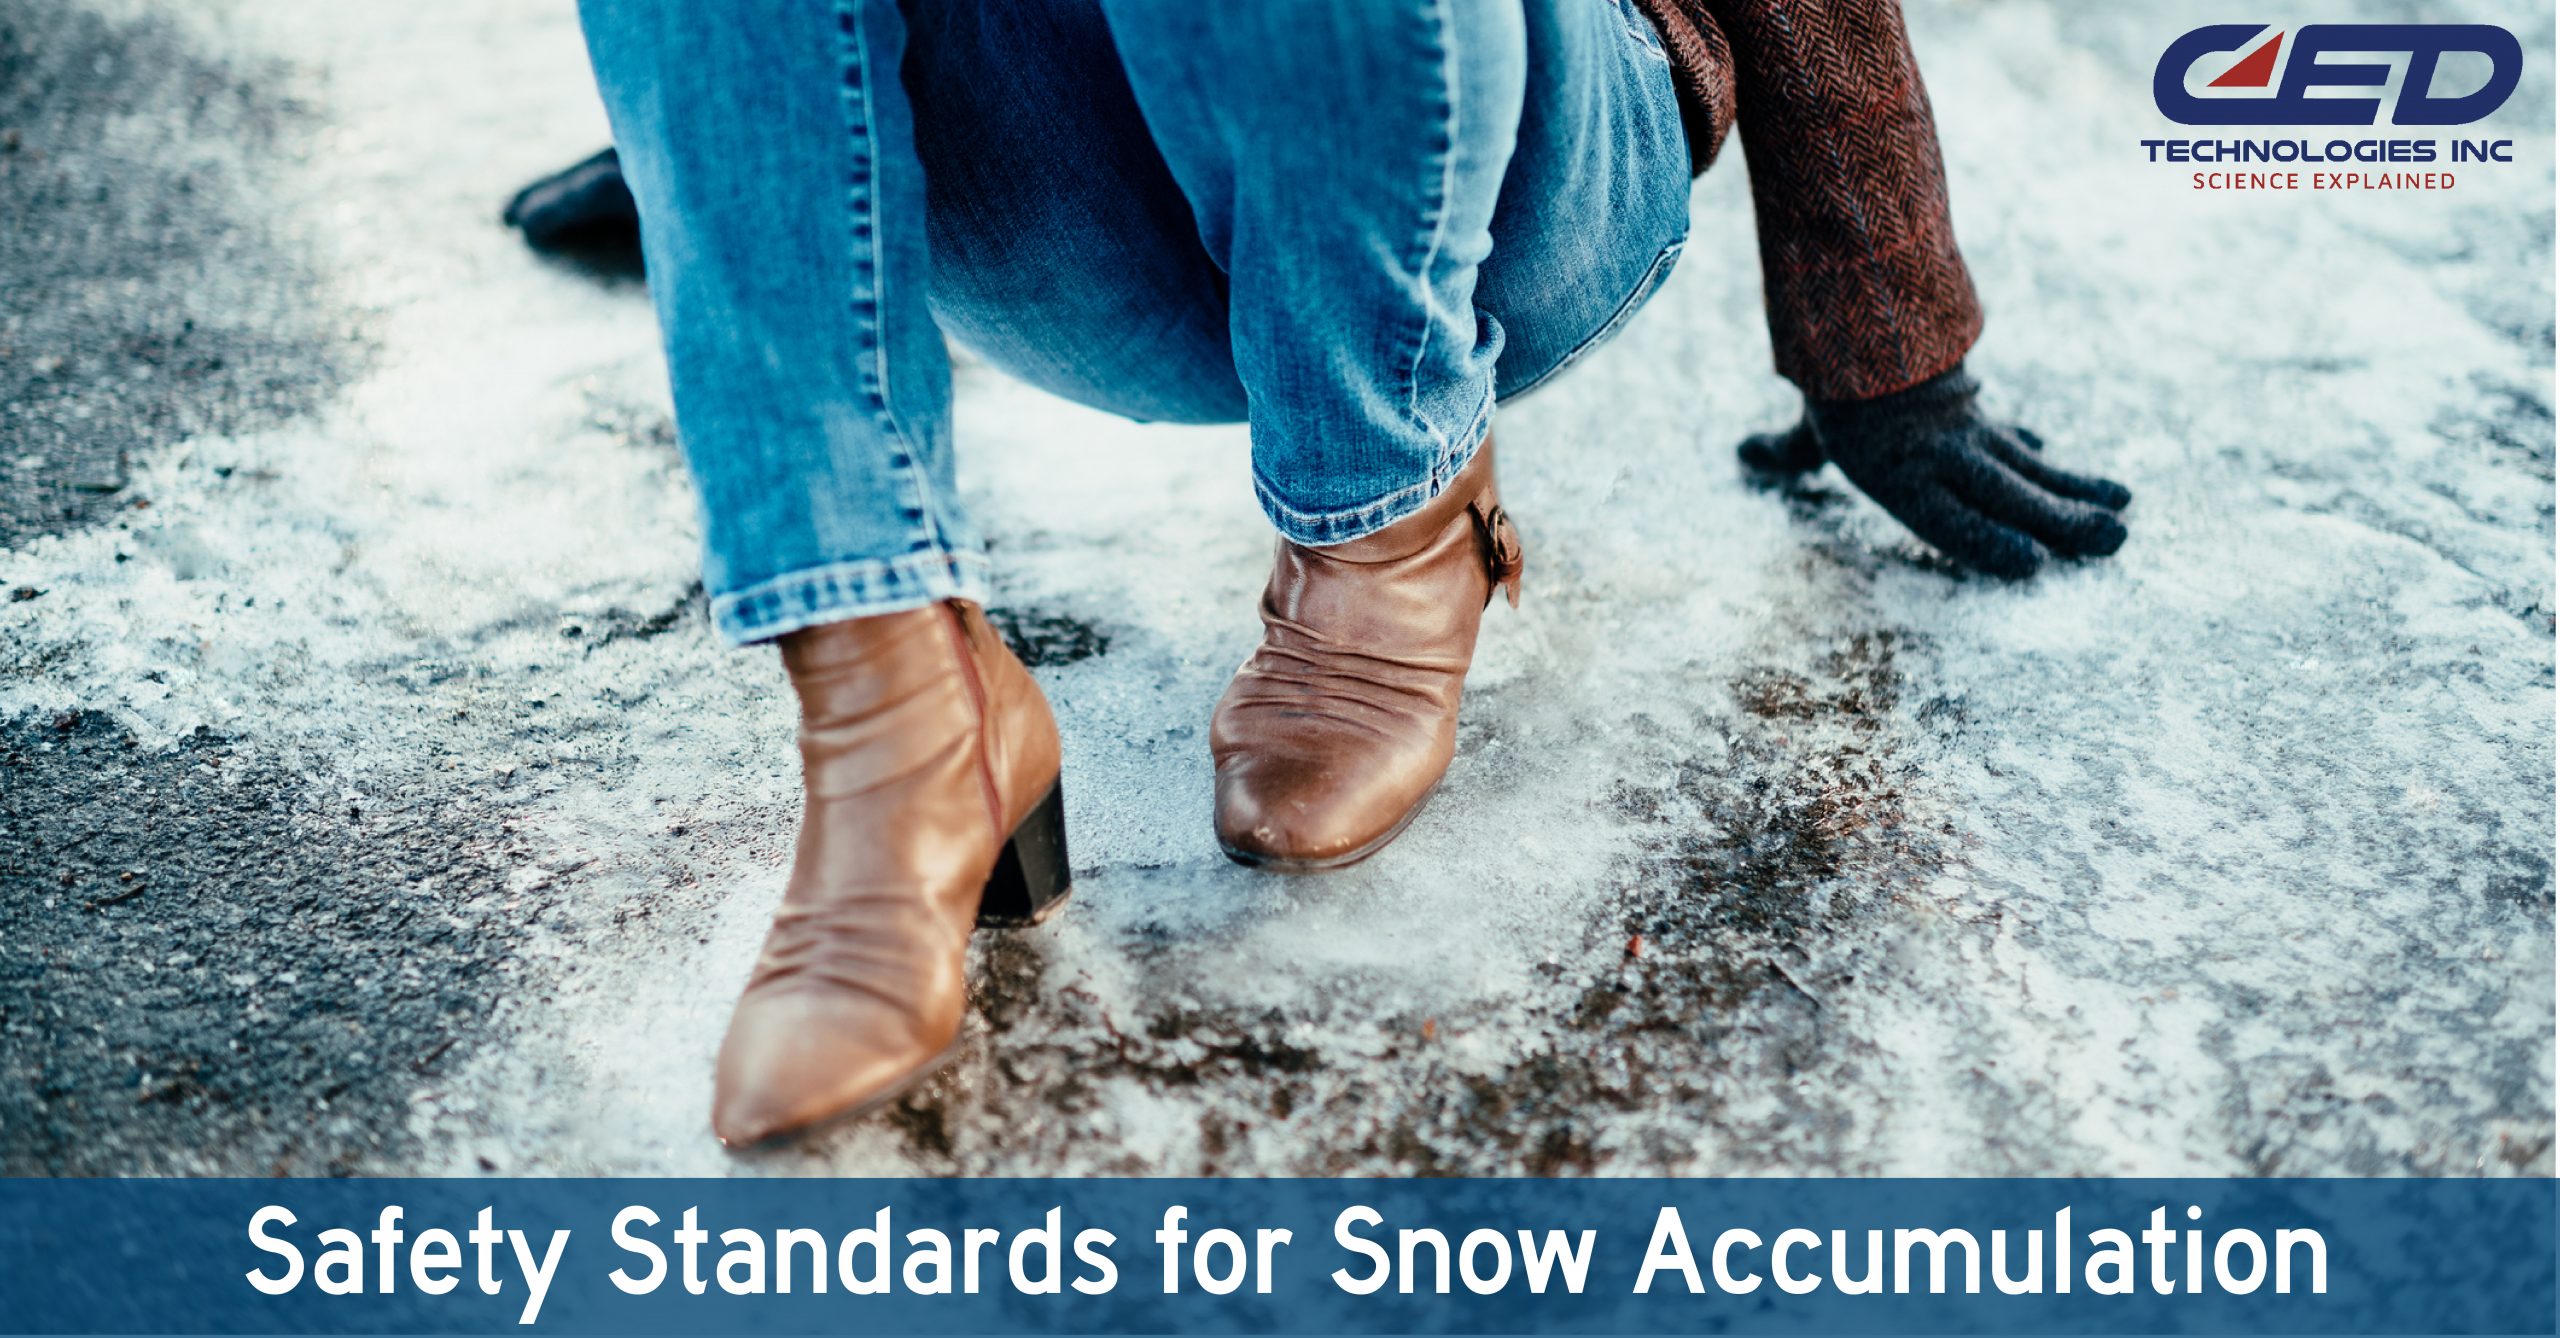 Natural vs. Unnatural Accumulation – Snow, Sleet, Ice, and Potential Injury